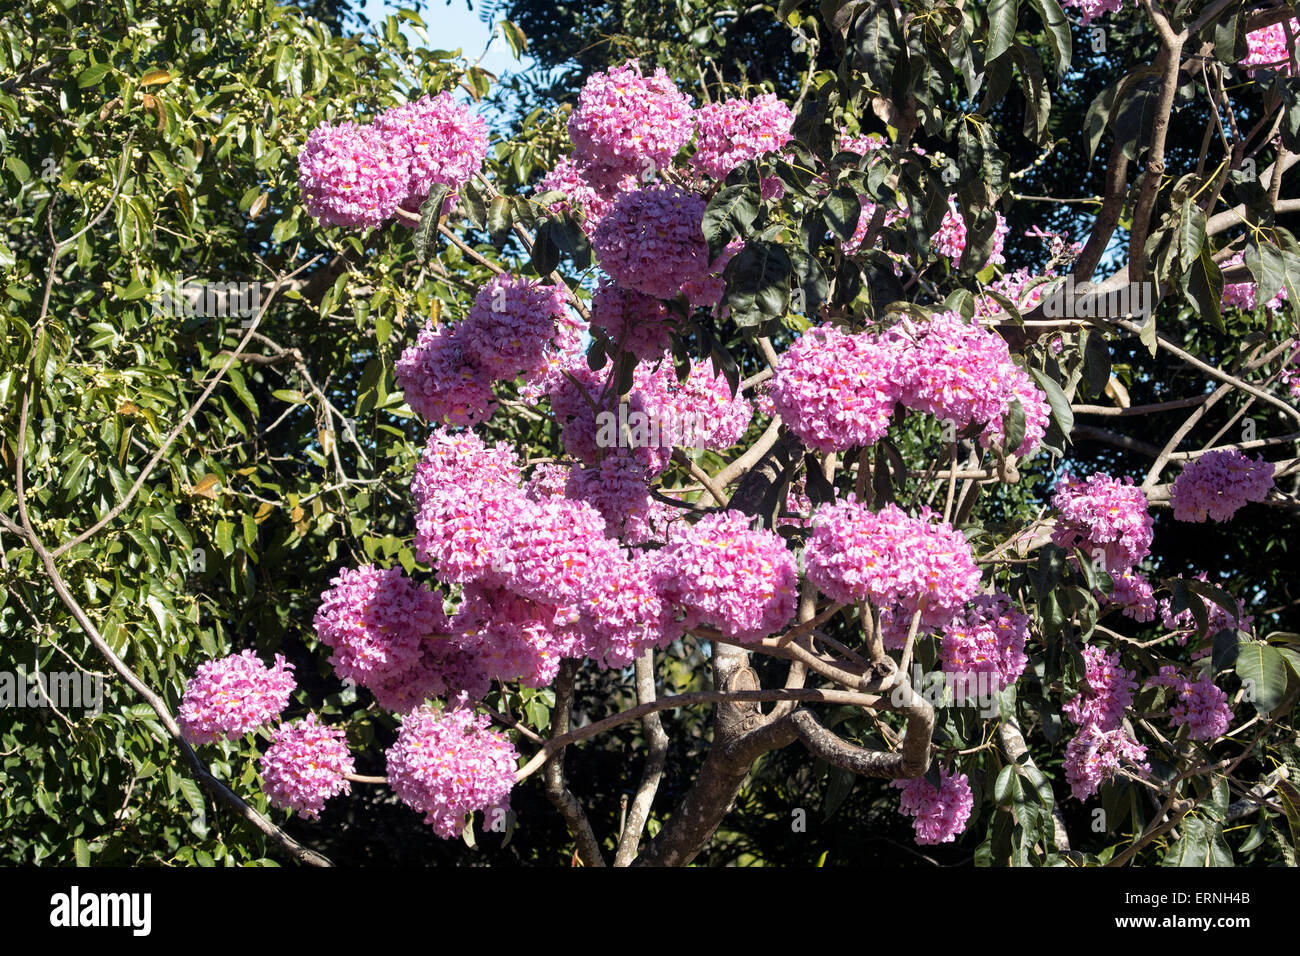 Large clusters of bright pink flowers of Tabebuia impetiginosa, pink trumpet tree, against dark green foliage in Australia Stock Photo